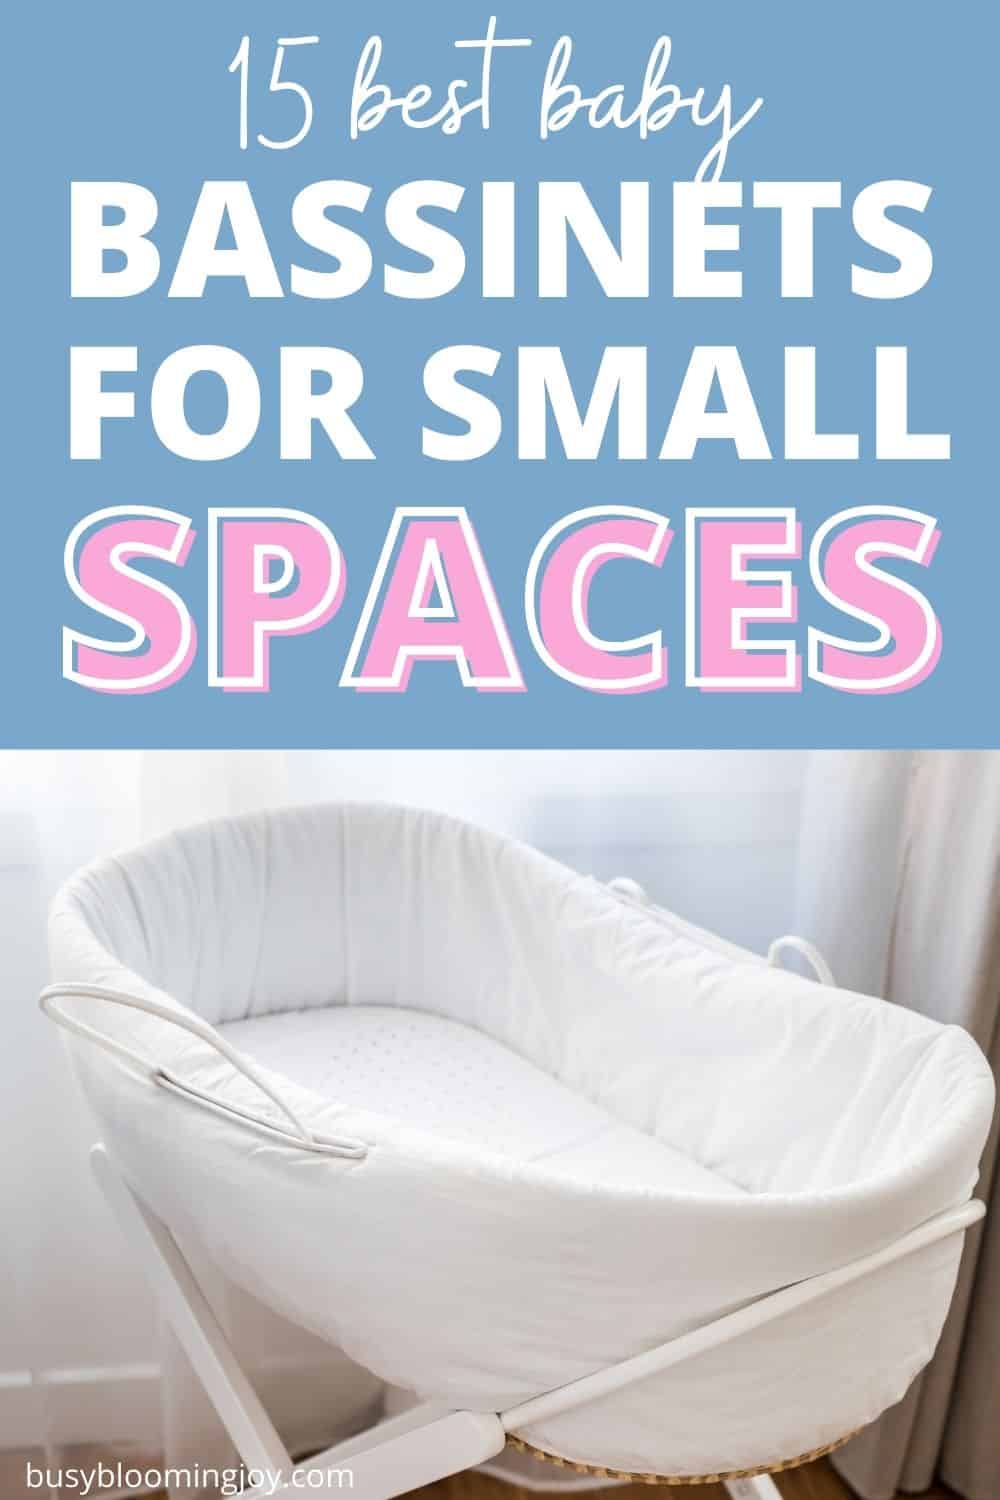 15 Best baby bassinets for small spaces